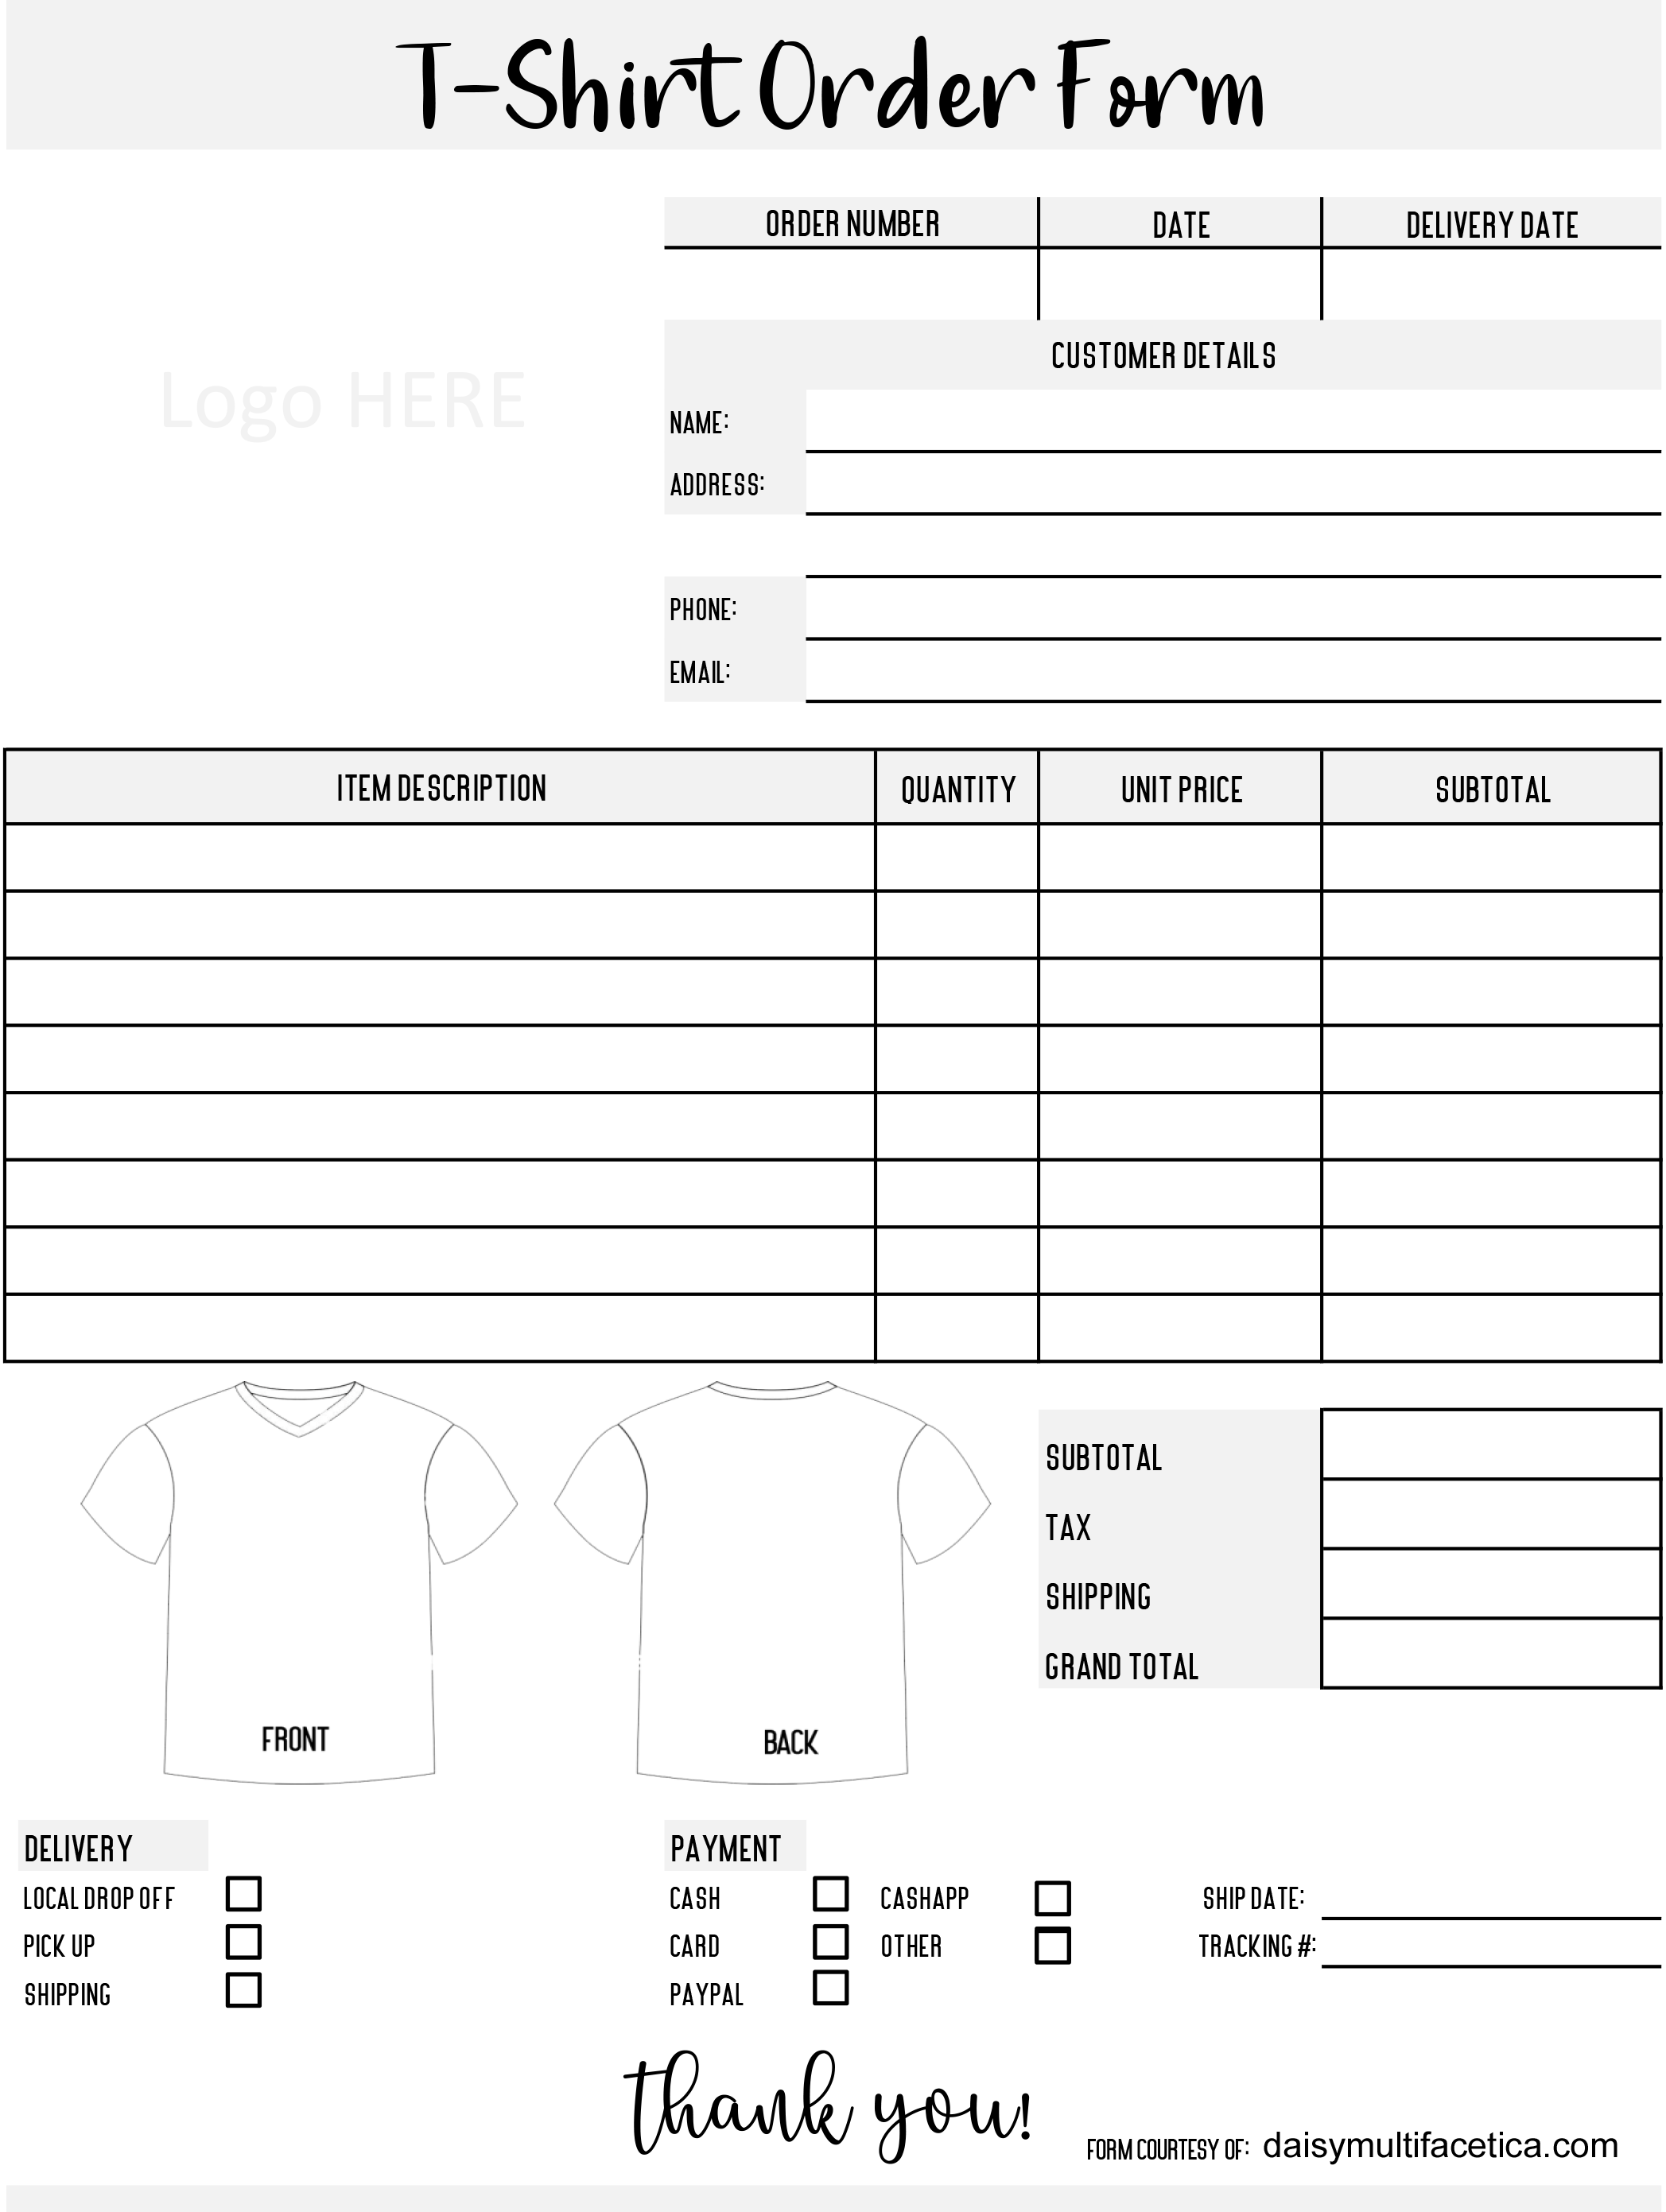 shirt-order-form-t-shirt-order-form-template-edit-in-canva-lupon-gov-ph